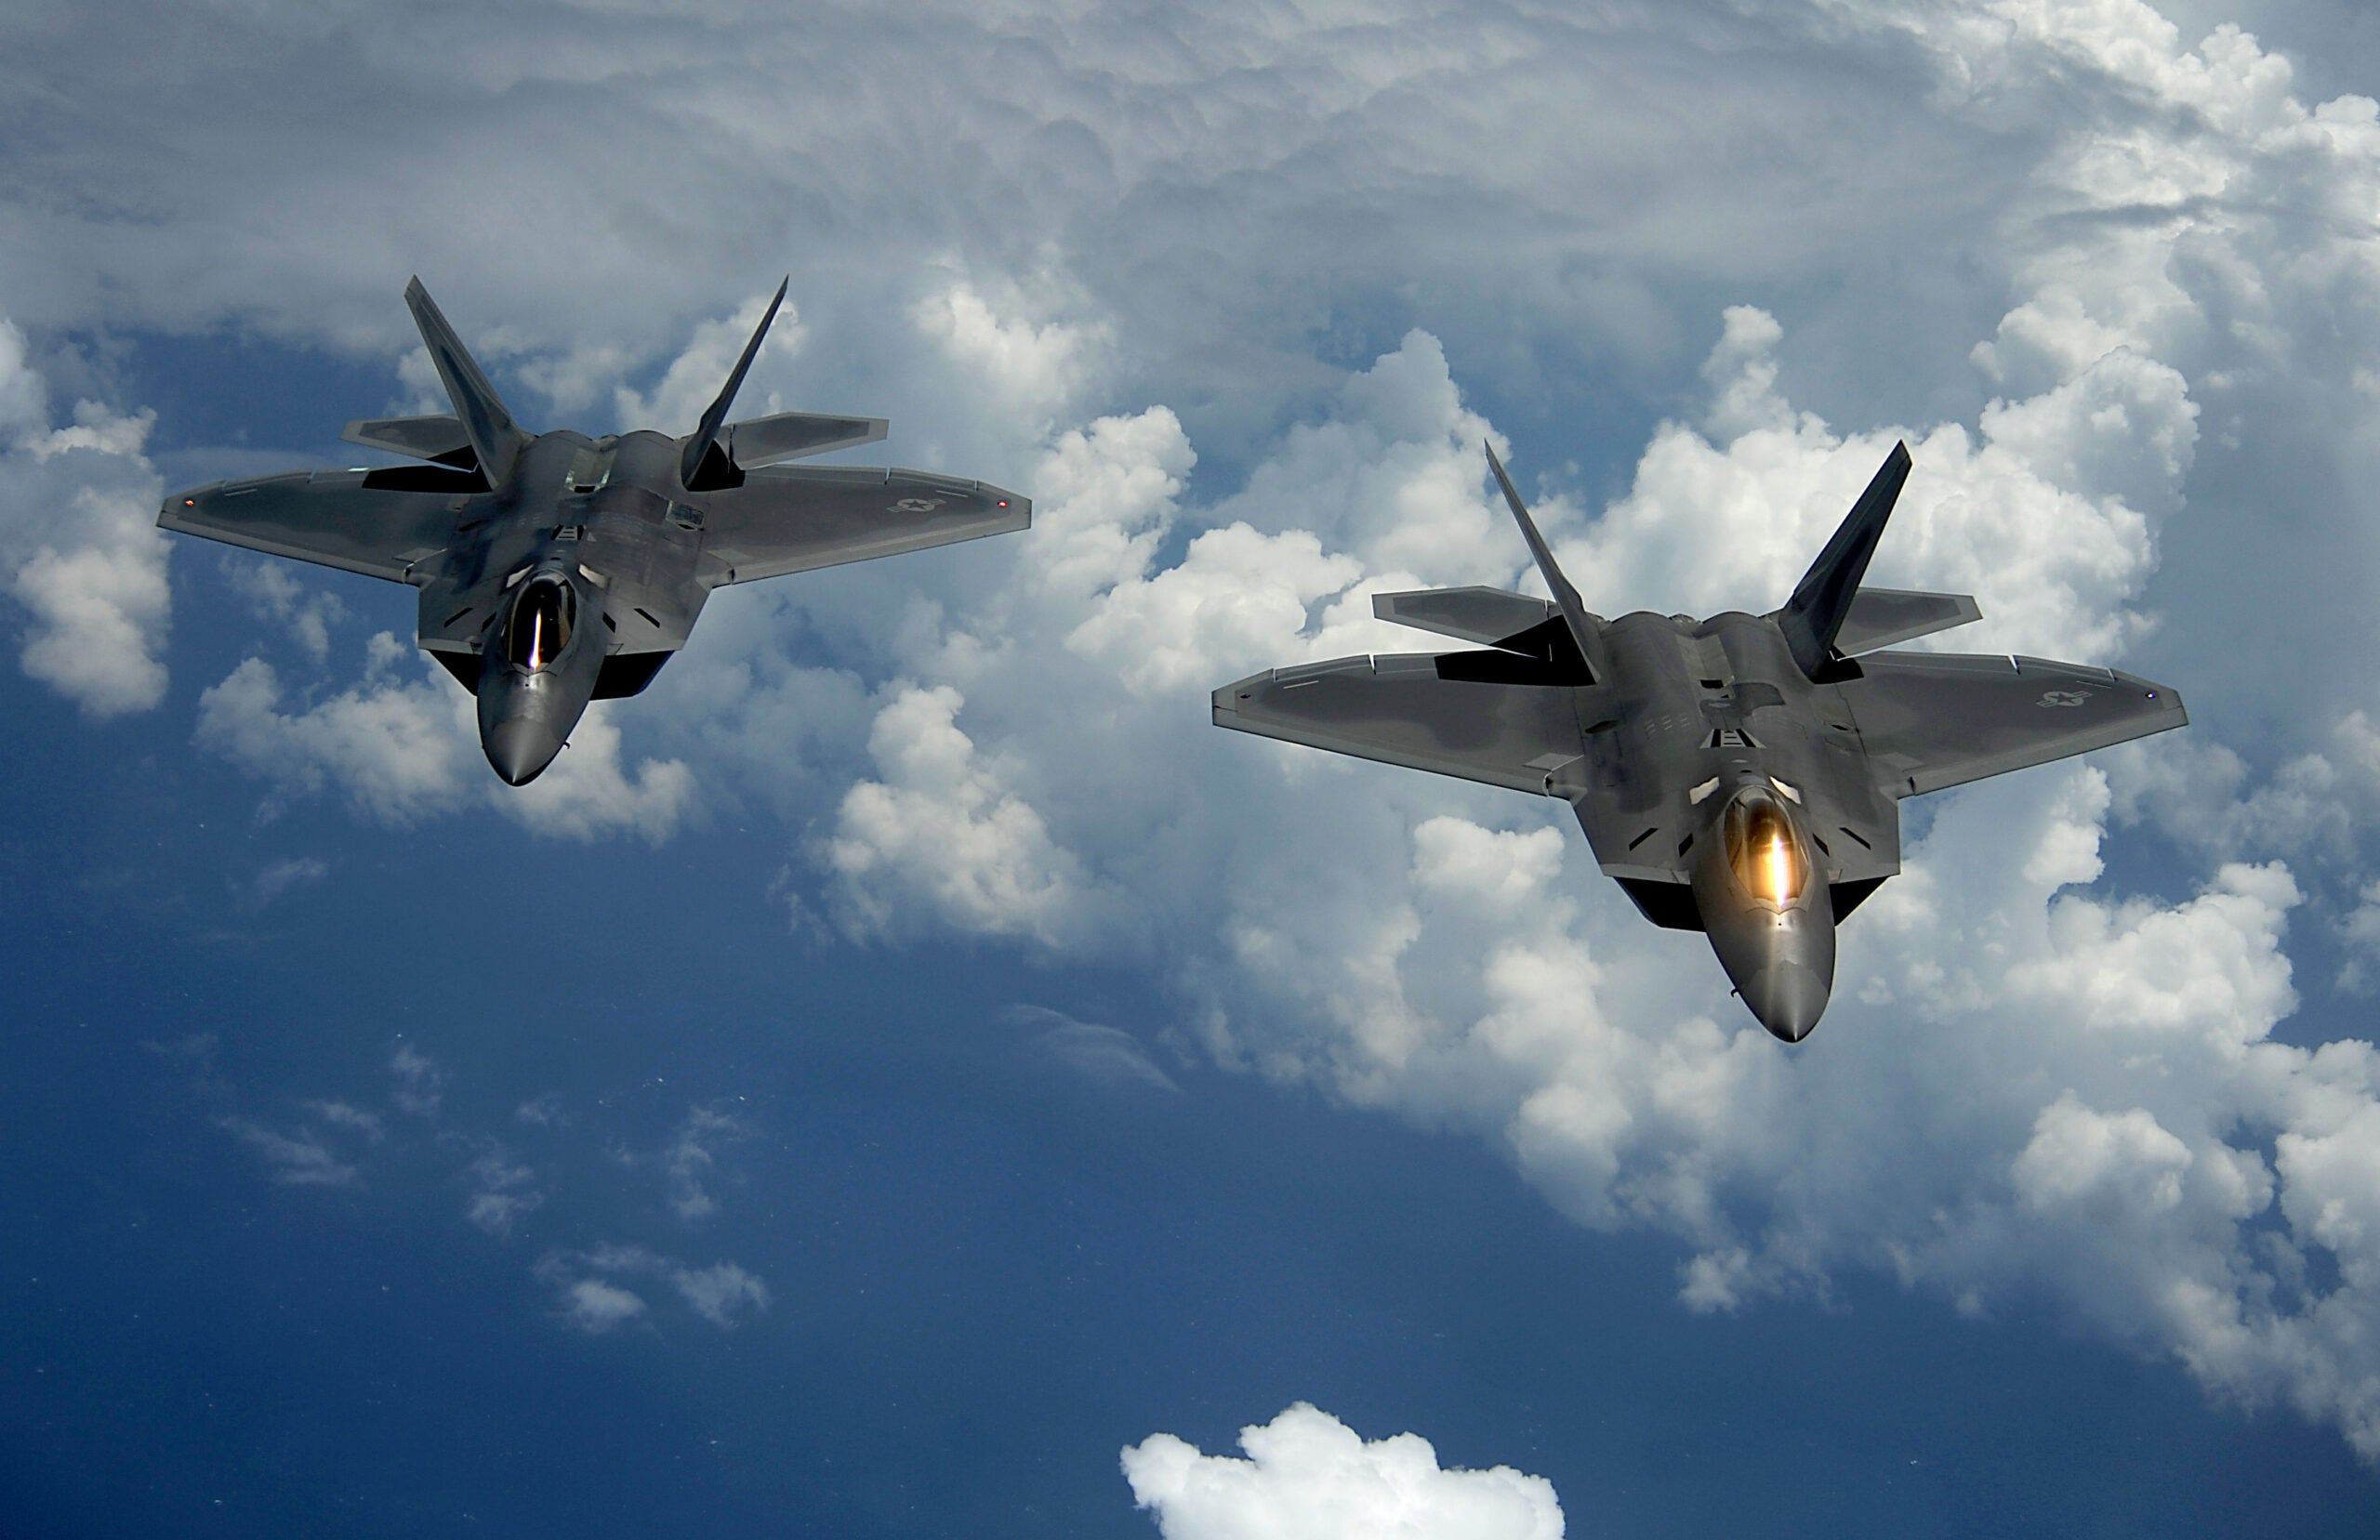 A pair of 1st Fighter Wing's F-22 Raptors from Joint Base Langley-Eustis, Va., pulls away and flies behind a KC-135 Stratotanker with the 756th Air Refueling Squadron, Joint Base Andrews Naval Air Facility, Md. after receiving fuel off the east coast on July 10, 2012. The first Raptor assigned to the Wing arrived Jan. 7, 2005. This aircraft was allocated as a trainer, and was docked in a hanger for maintenance personnel to familiarize themselves with its complex systems. The second Raptor, designated for flying operations, arrived Jan. 18, 2005. On Dec. 15, 2005, Air Combat Command commander, along with the 1st FW commander, announced the 27th Fighter Squadron as fully operational capable to fly, fight and win with the F-22.